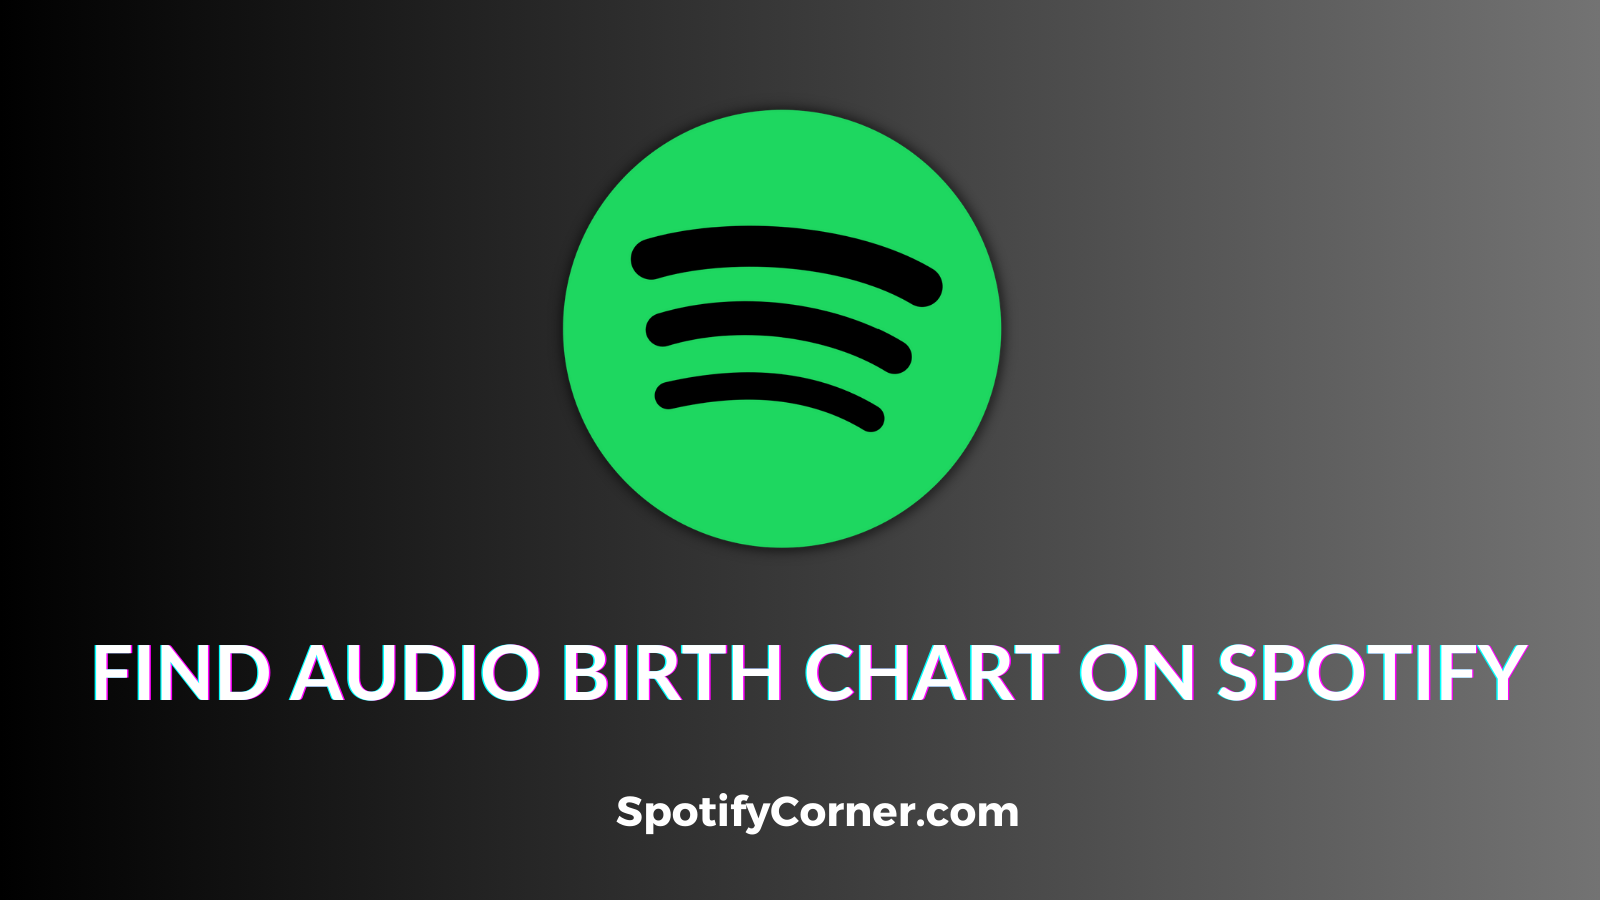 How to find my audio birth chart on Spotify